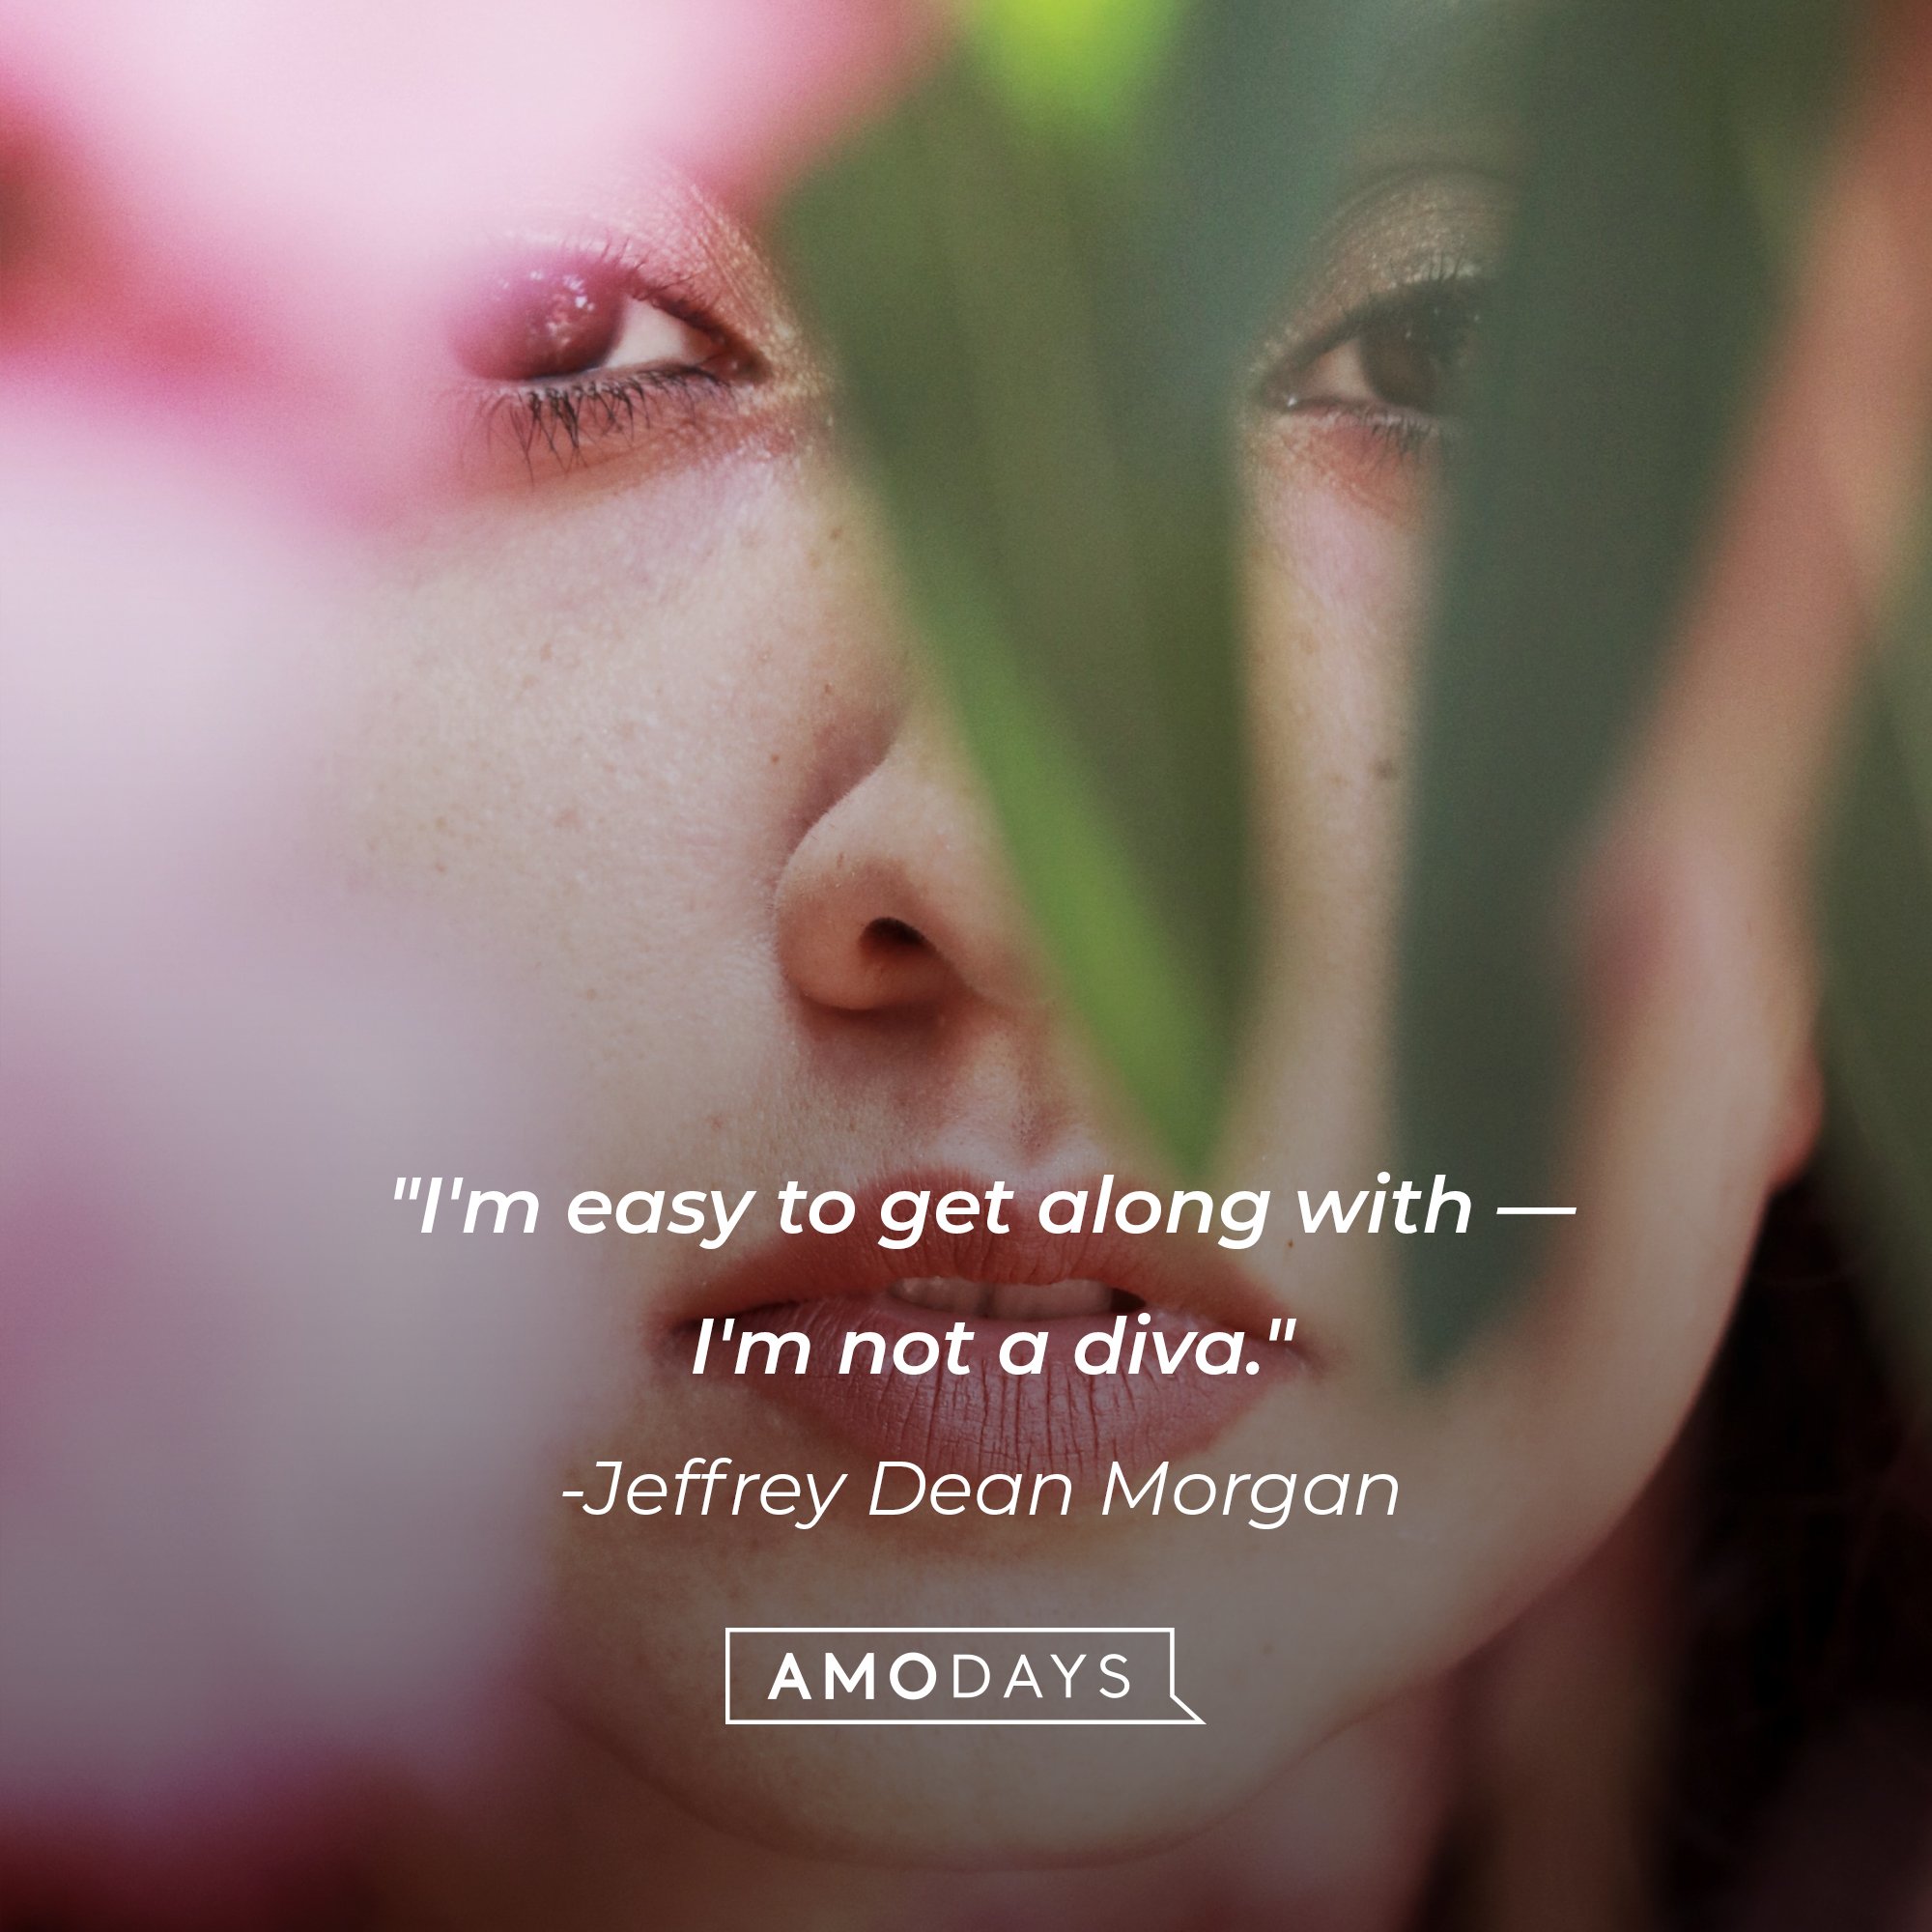 Jeffrey Dean Morgan’s quote: "I'm easy to get along with — I'm not a diva." | Image: AmoDays